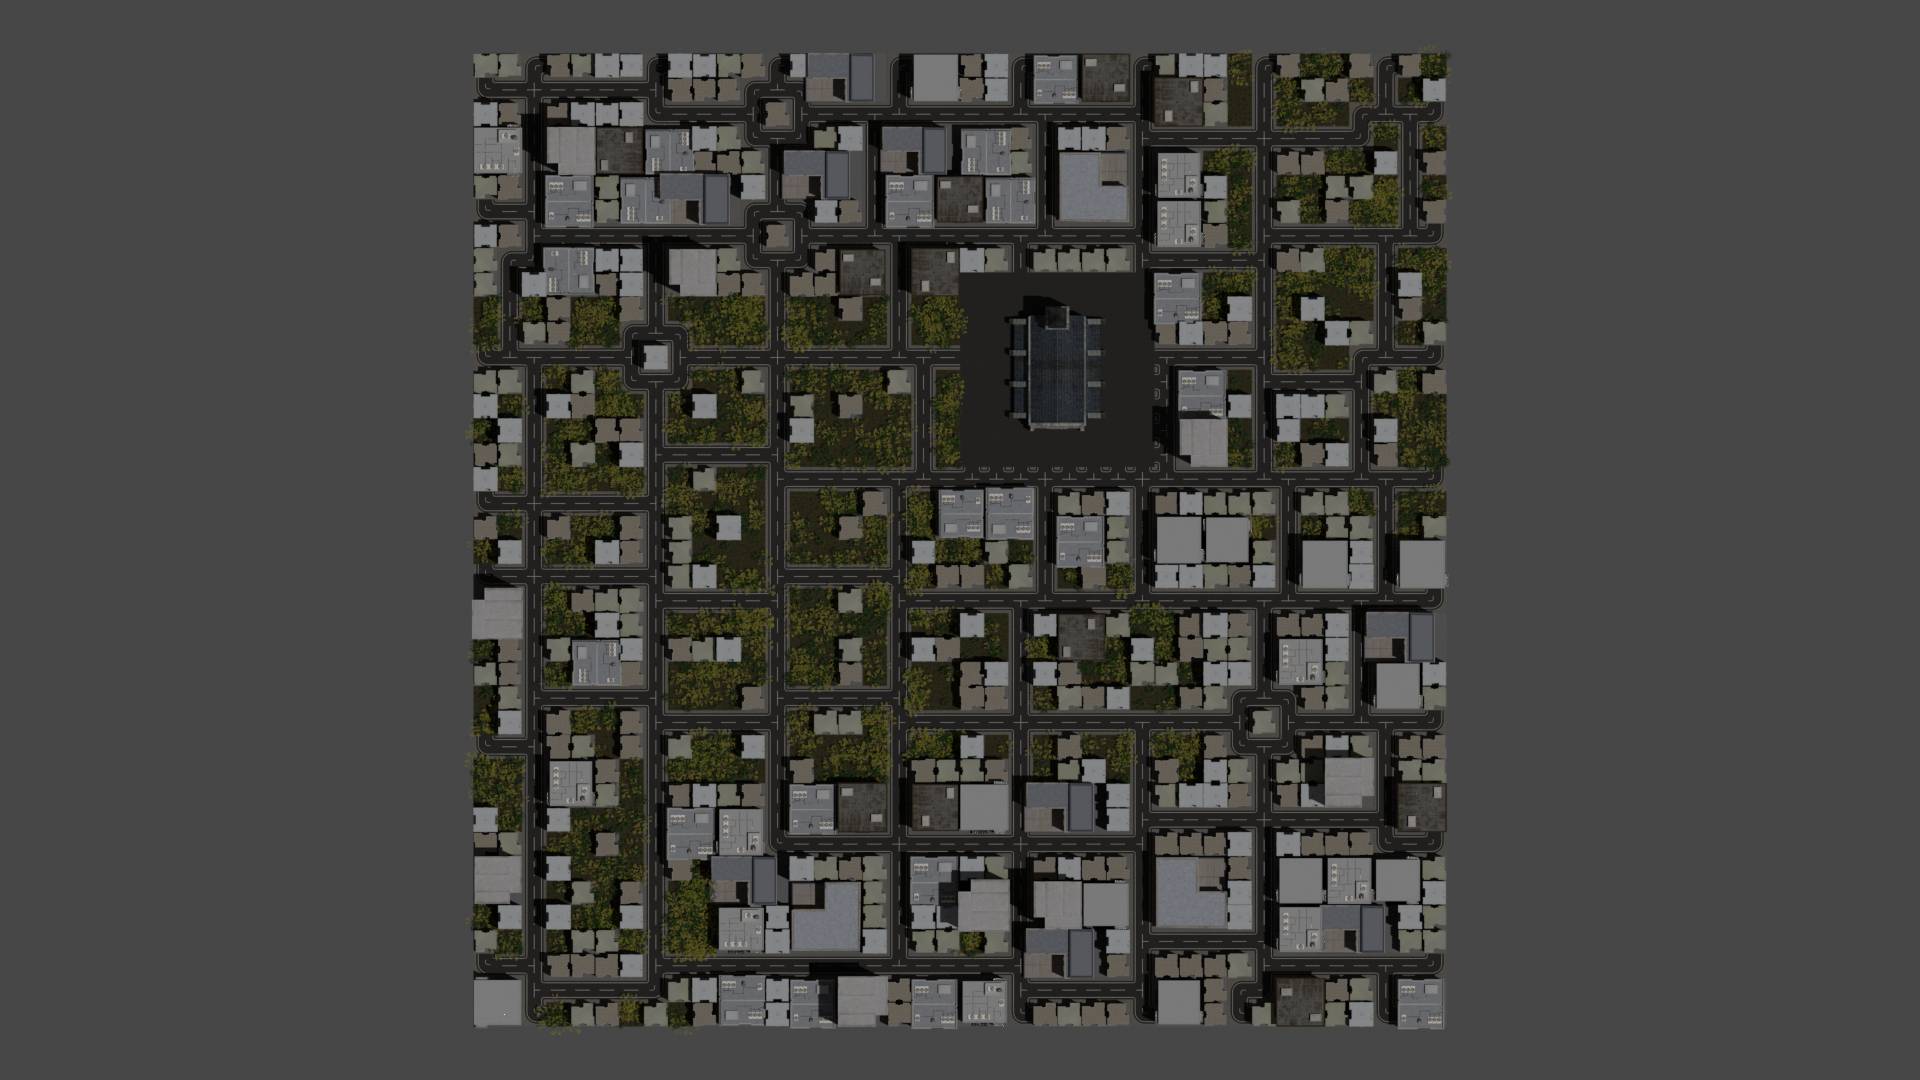 Top Down view of Generated City rendered in 2D Orthographic